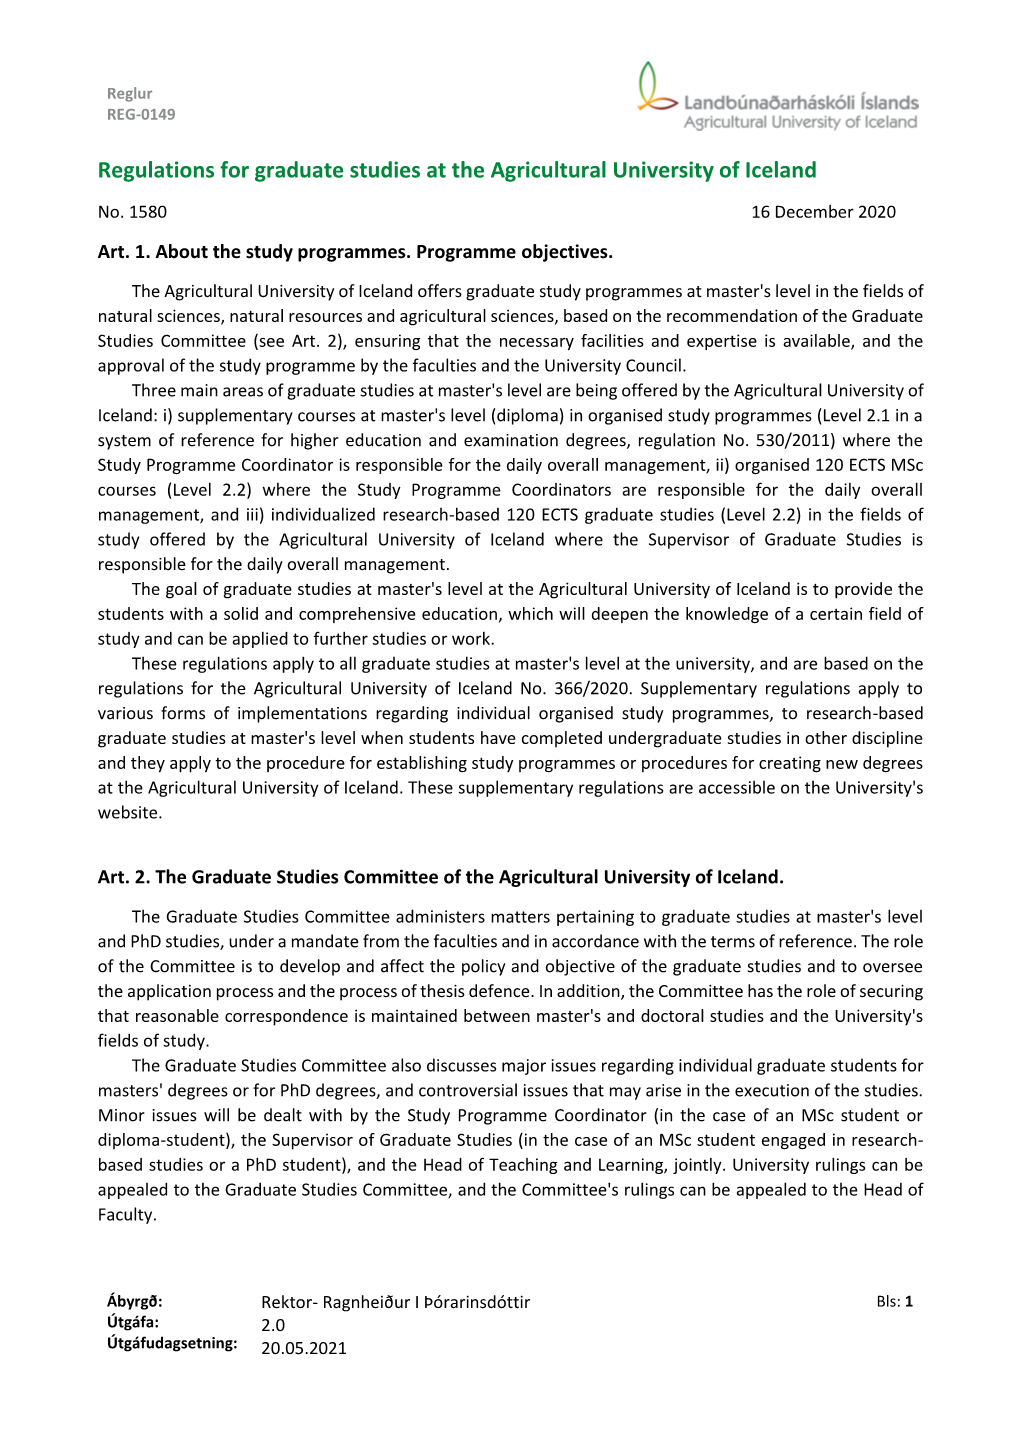 Regulations for Graduate Studies at the Agricultural University of Iceland